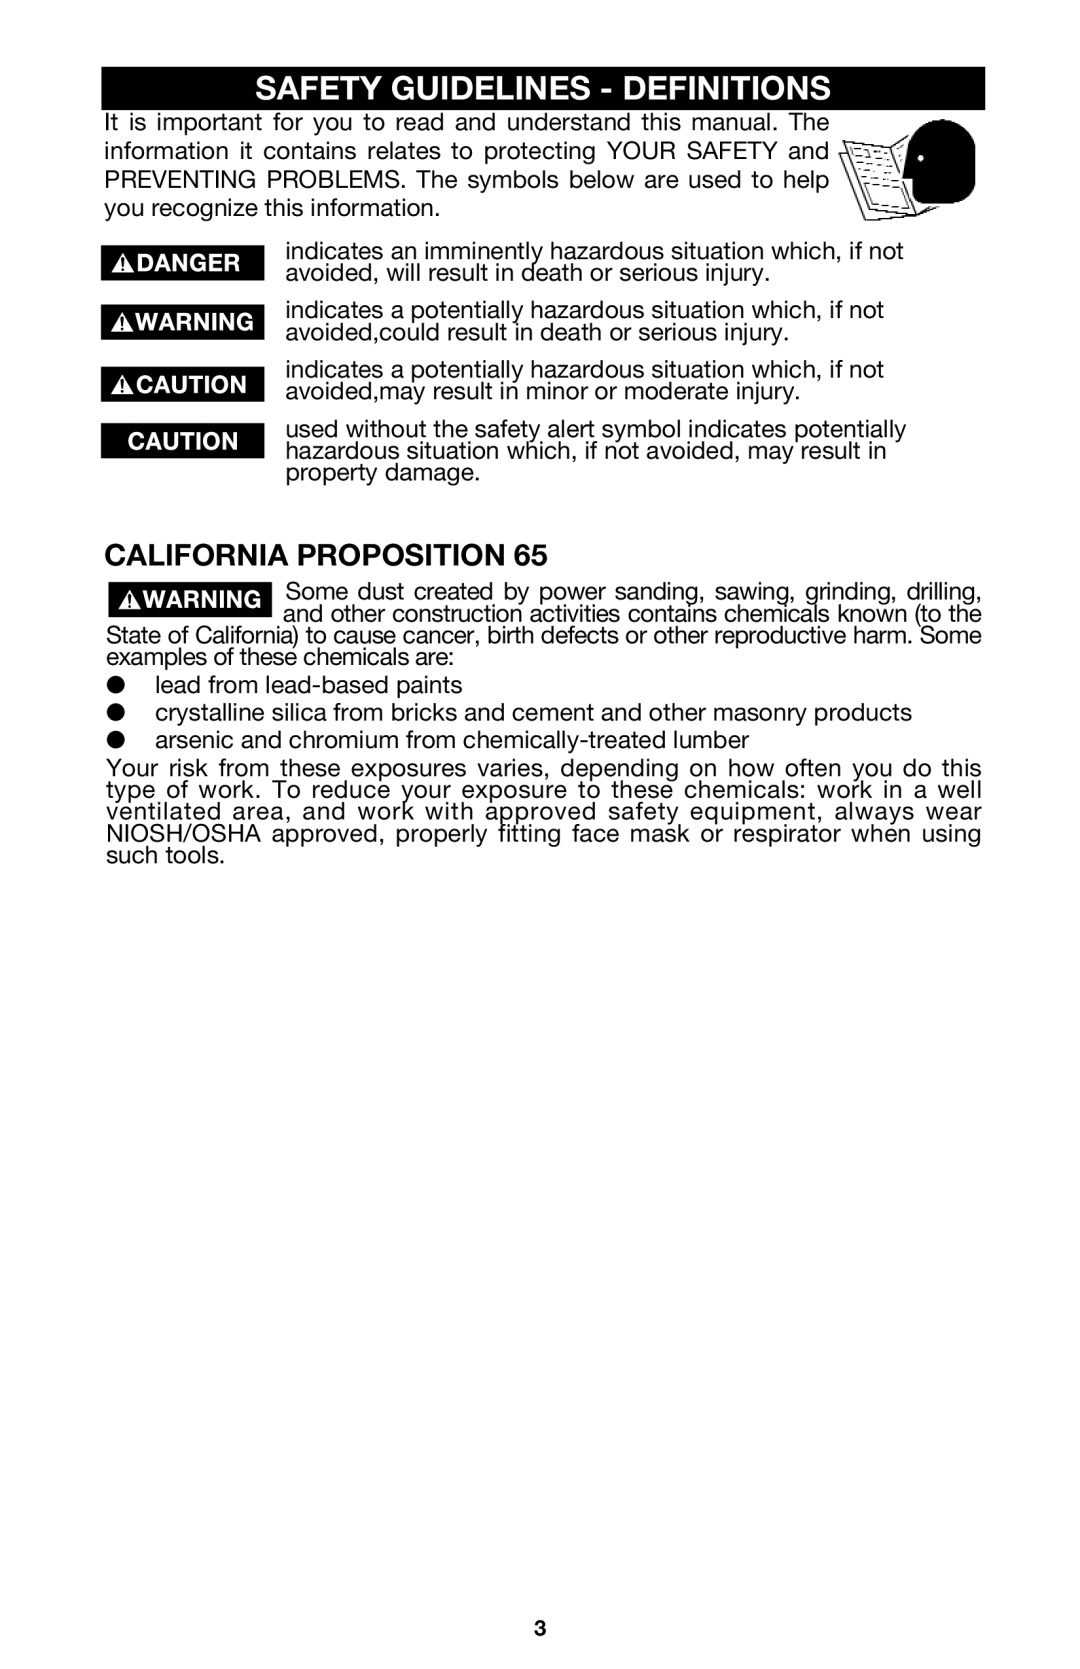 Porter-Cable 444vs instruction manual Safety Guidelines - Definitions, California Proposition 